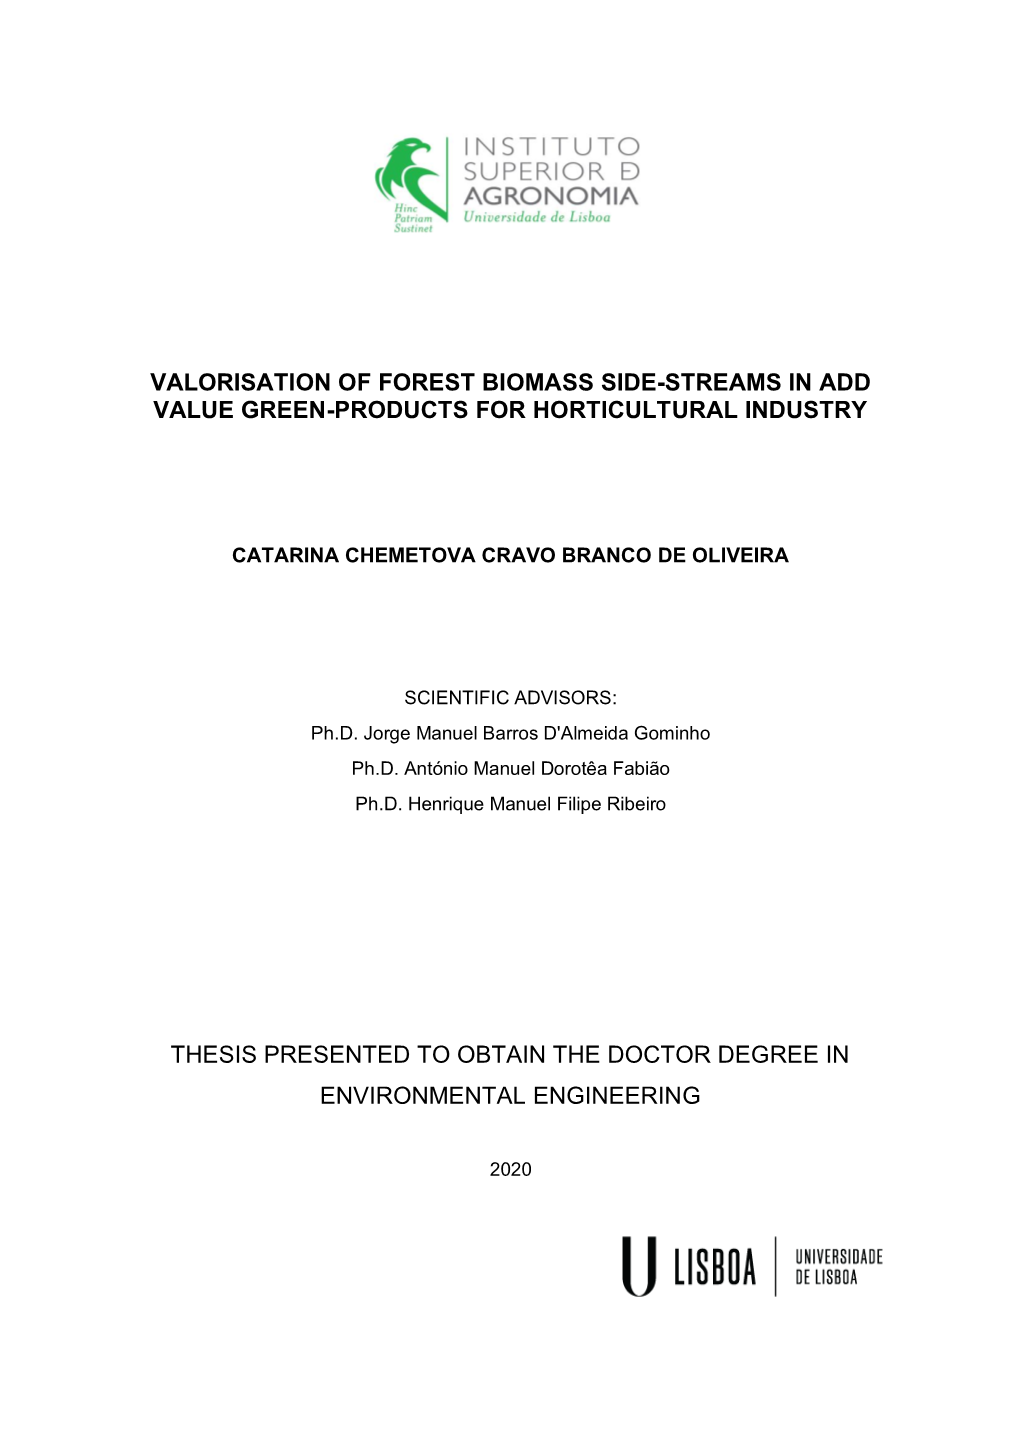 Valorisation of Forest Biomass Side-Streams in Add Value Green-Products for Horticultural Industry